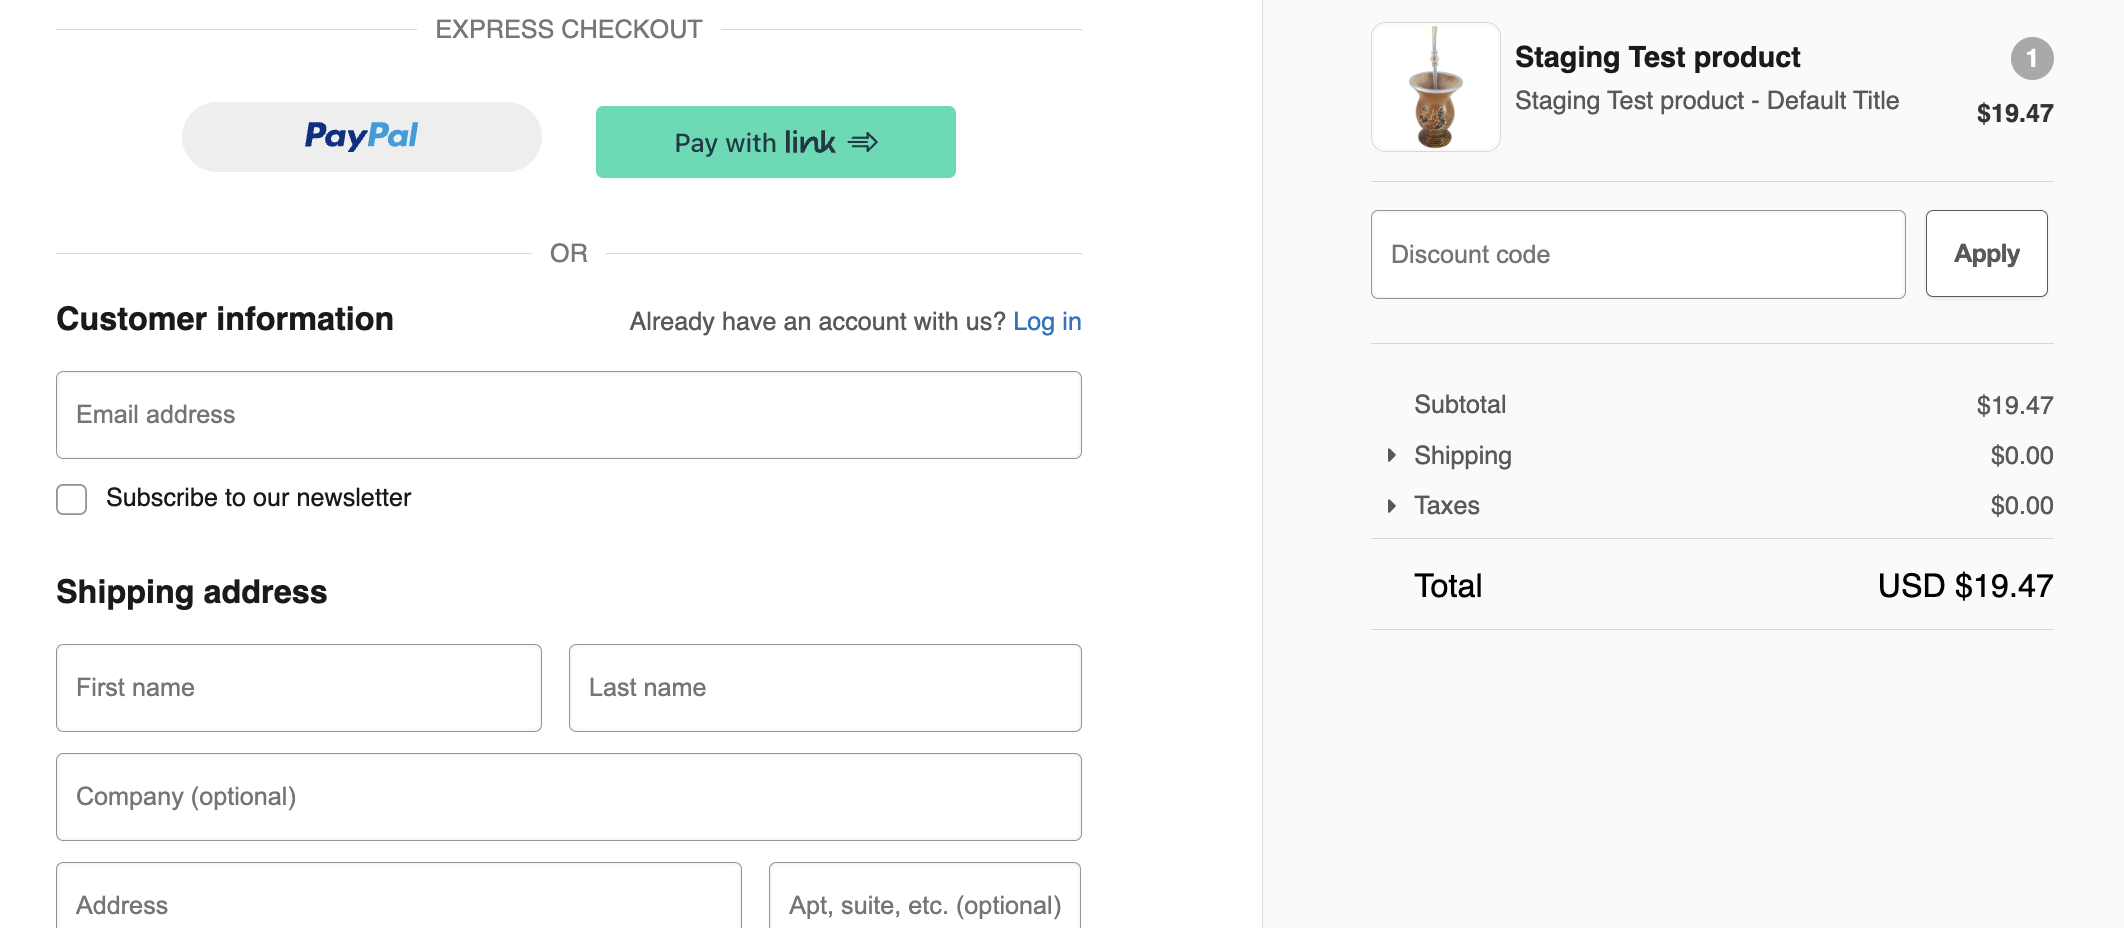 Screenshot of Express Checkout section in templates